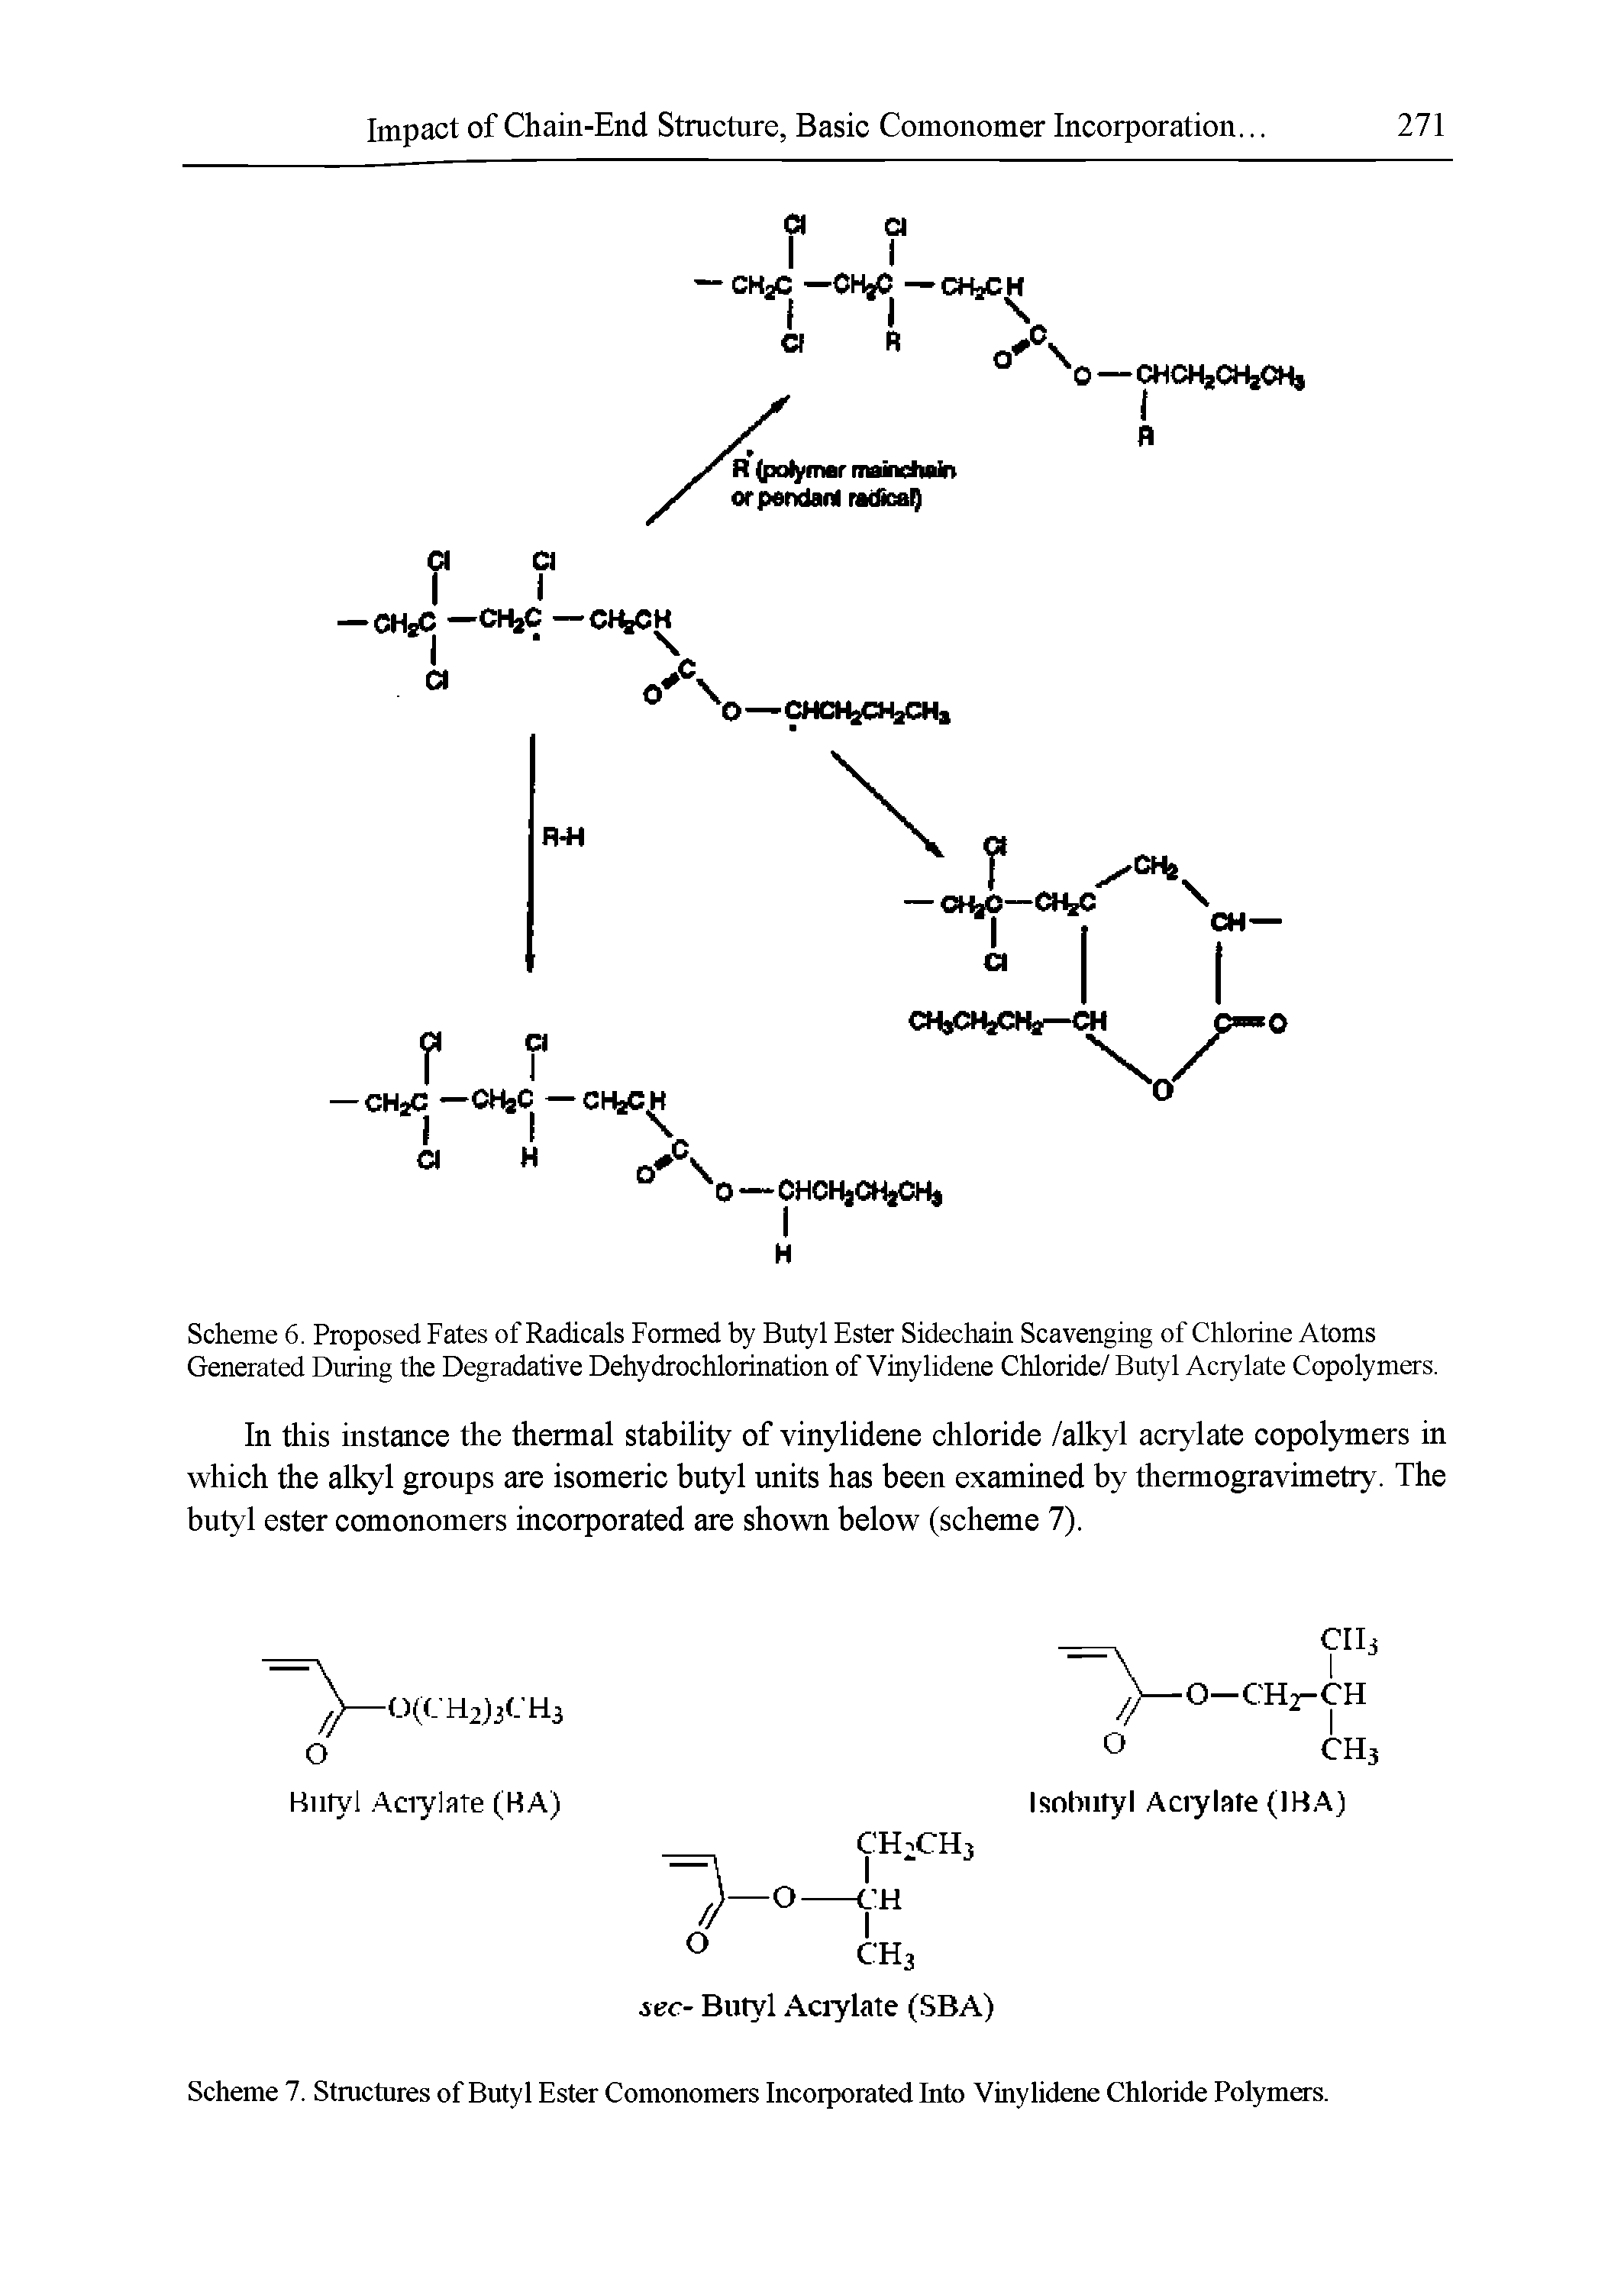 Scheme 7. Structures of Butyl Ester Comonomers Incorporated Into Vinylidene Chloride Polymers.